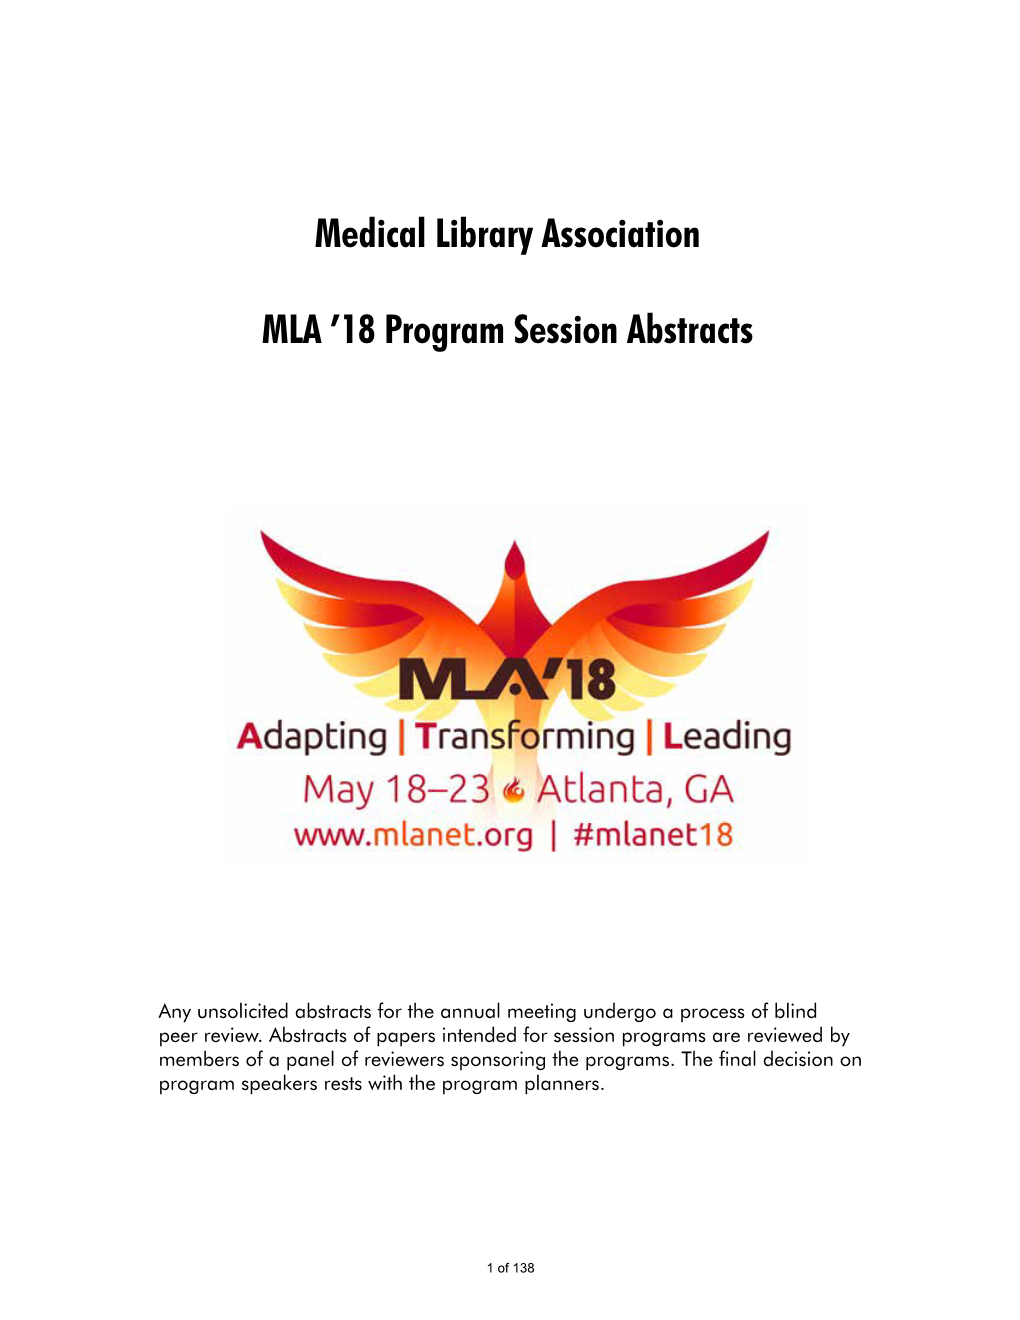 MLA ’18 Program Session Abstracts